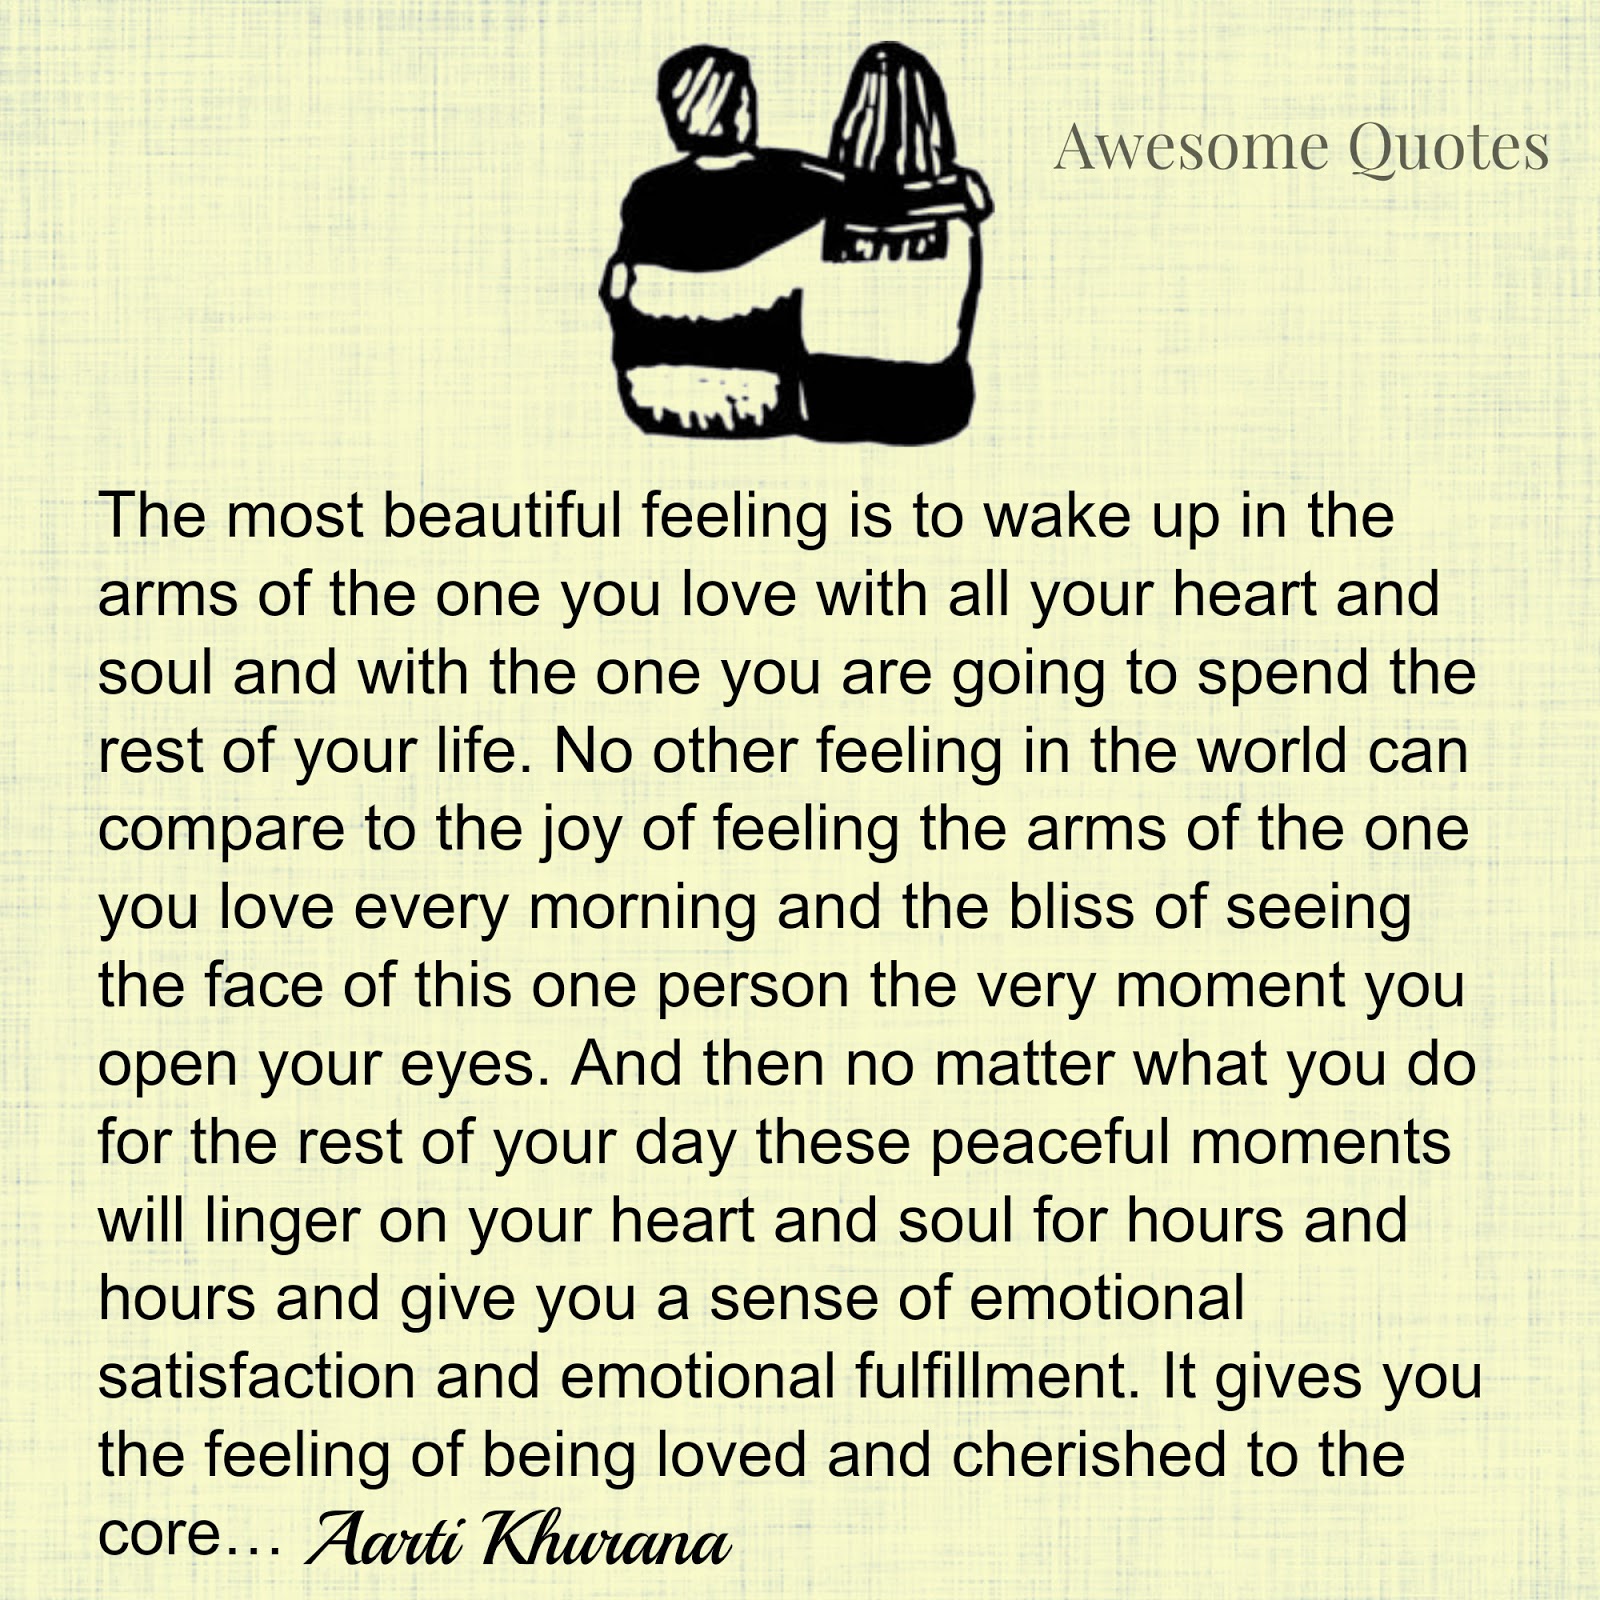 Awesome Quotes: The Most Beautiful Feeling